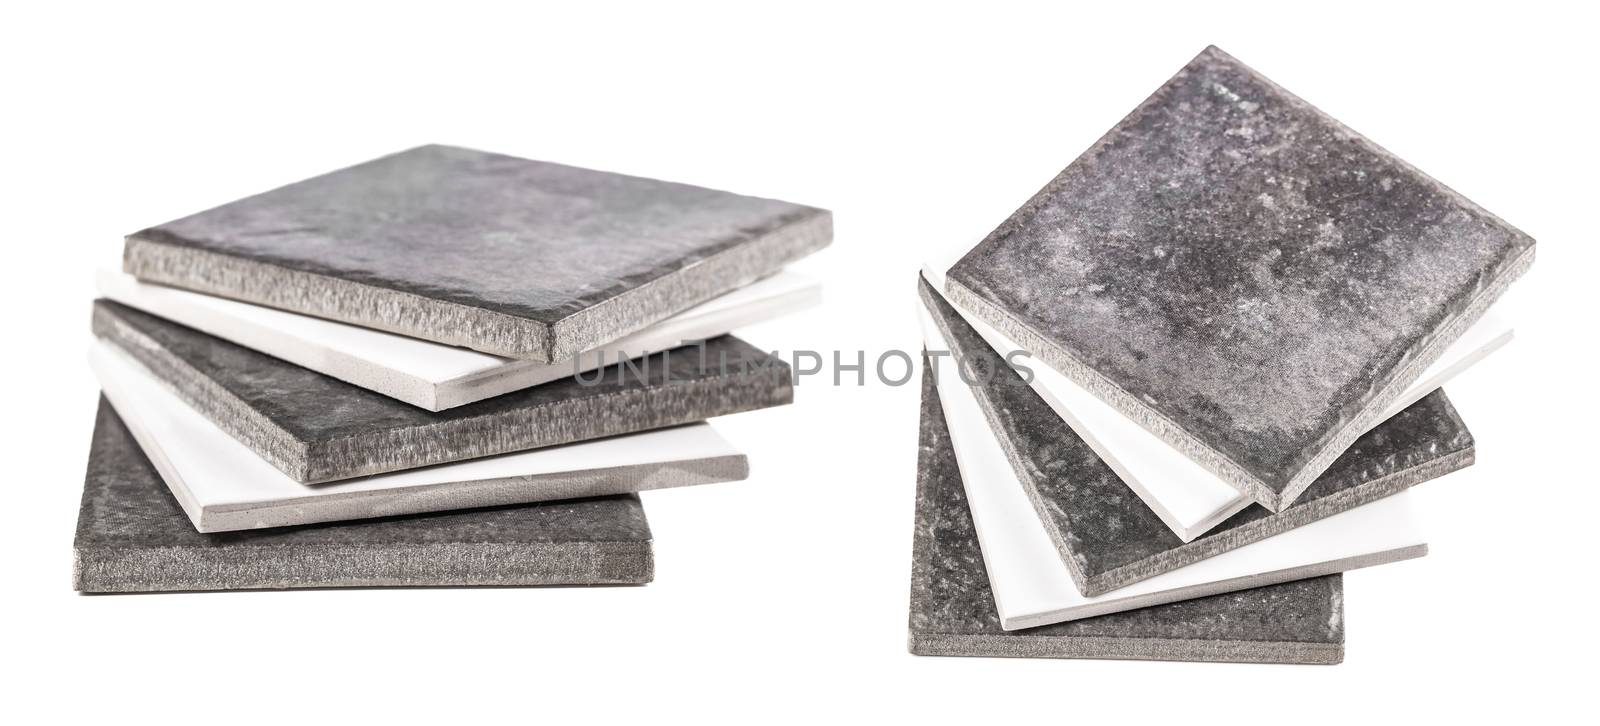 ceramic tile closeup isolated on a white background